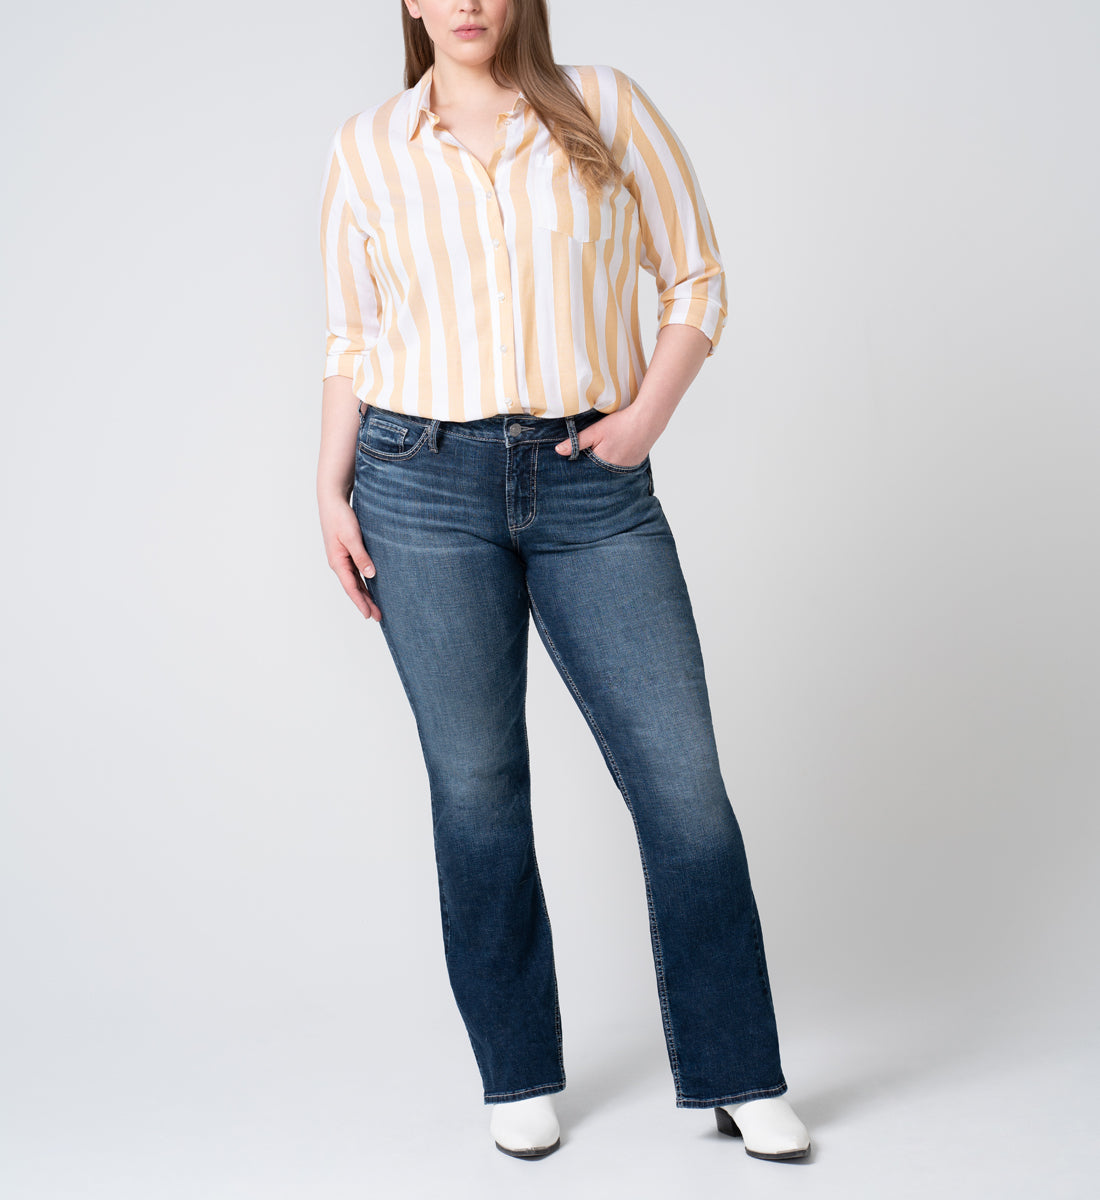 Silver Jeans Suki Mid Rise Slim Bootcut Jeans Plus Size – Search By Inseam